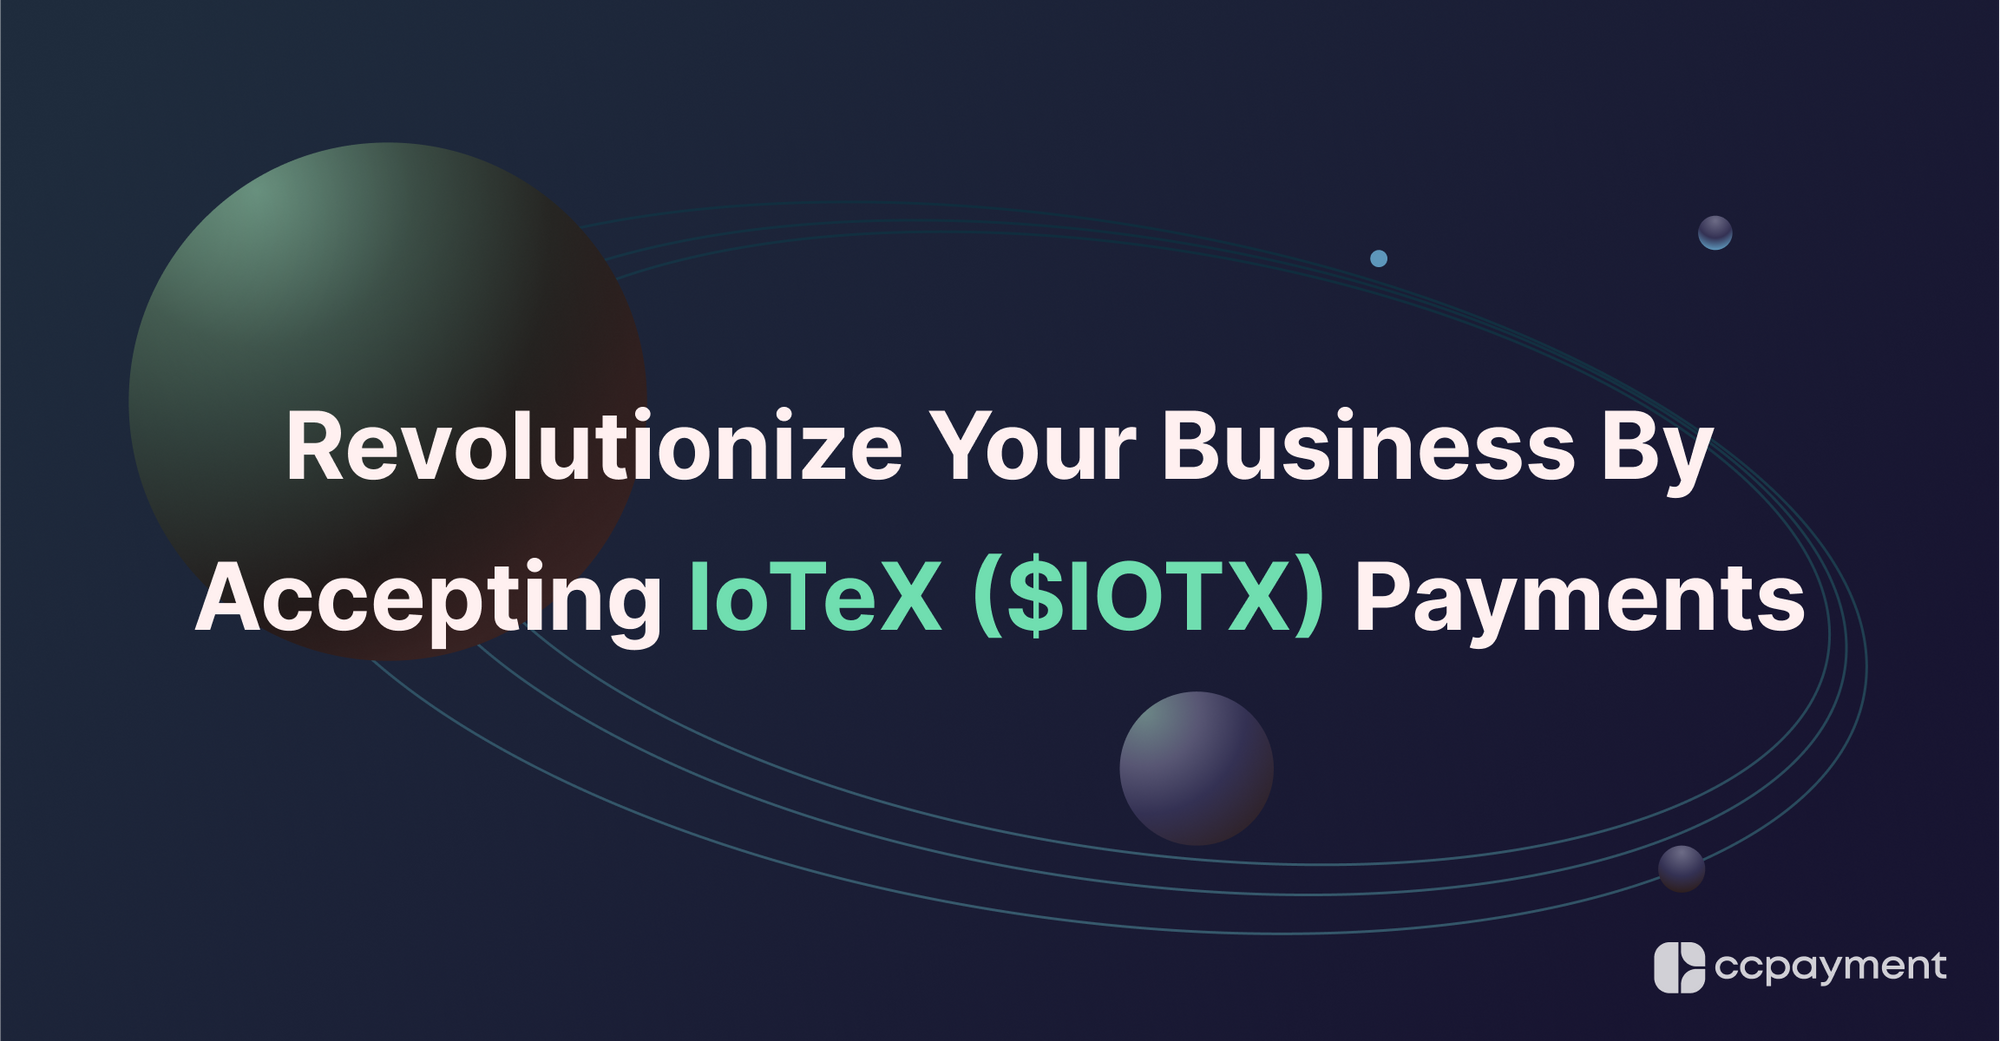 Revolutionize Your Business With Crypto - See How To Accept IoTeX ($IOTX) Payments